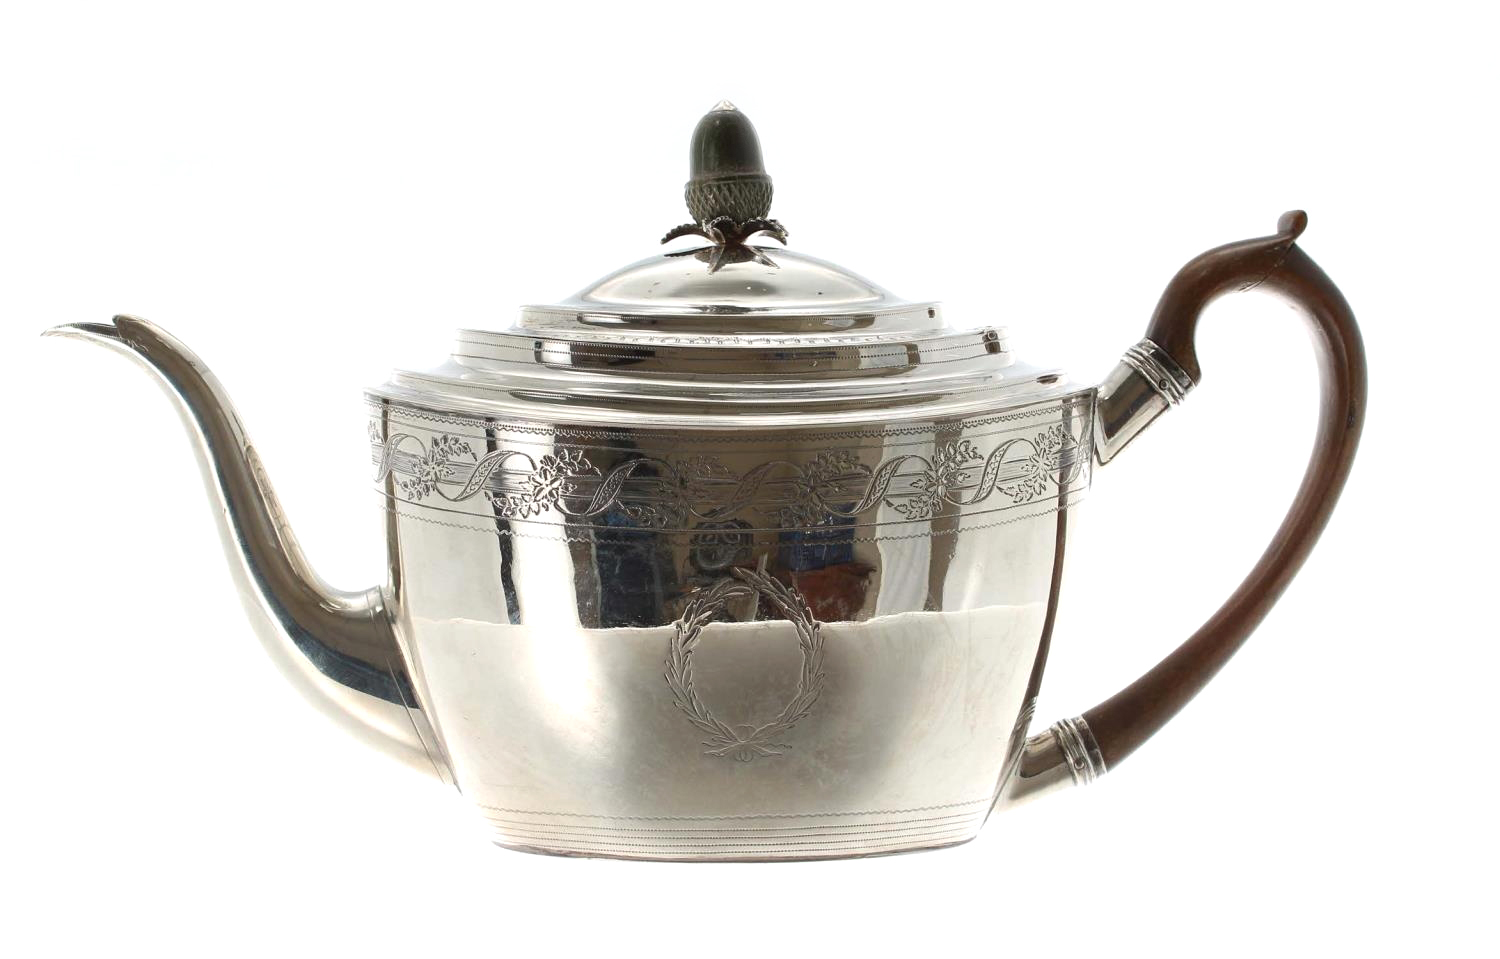 George III silver teapot, with hardwood handle and acorn finial, the body with engraved foliate